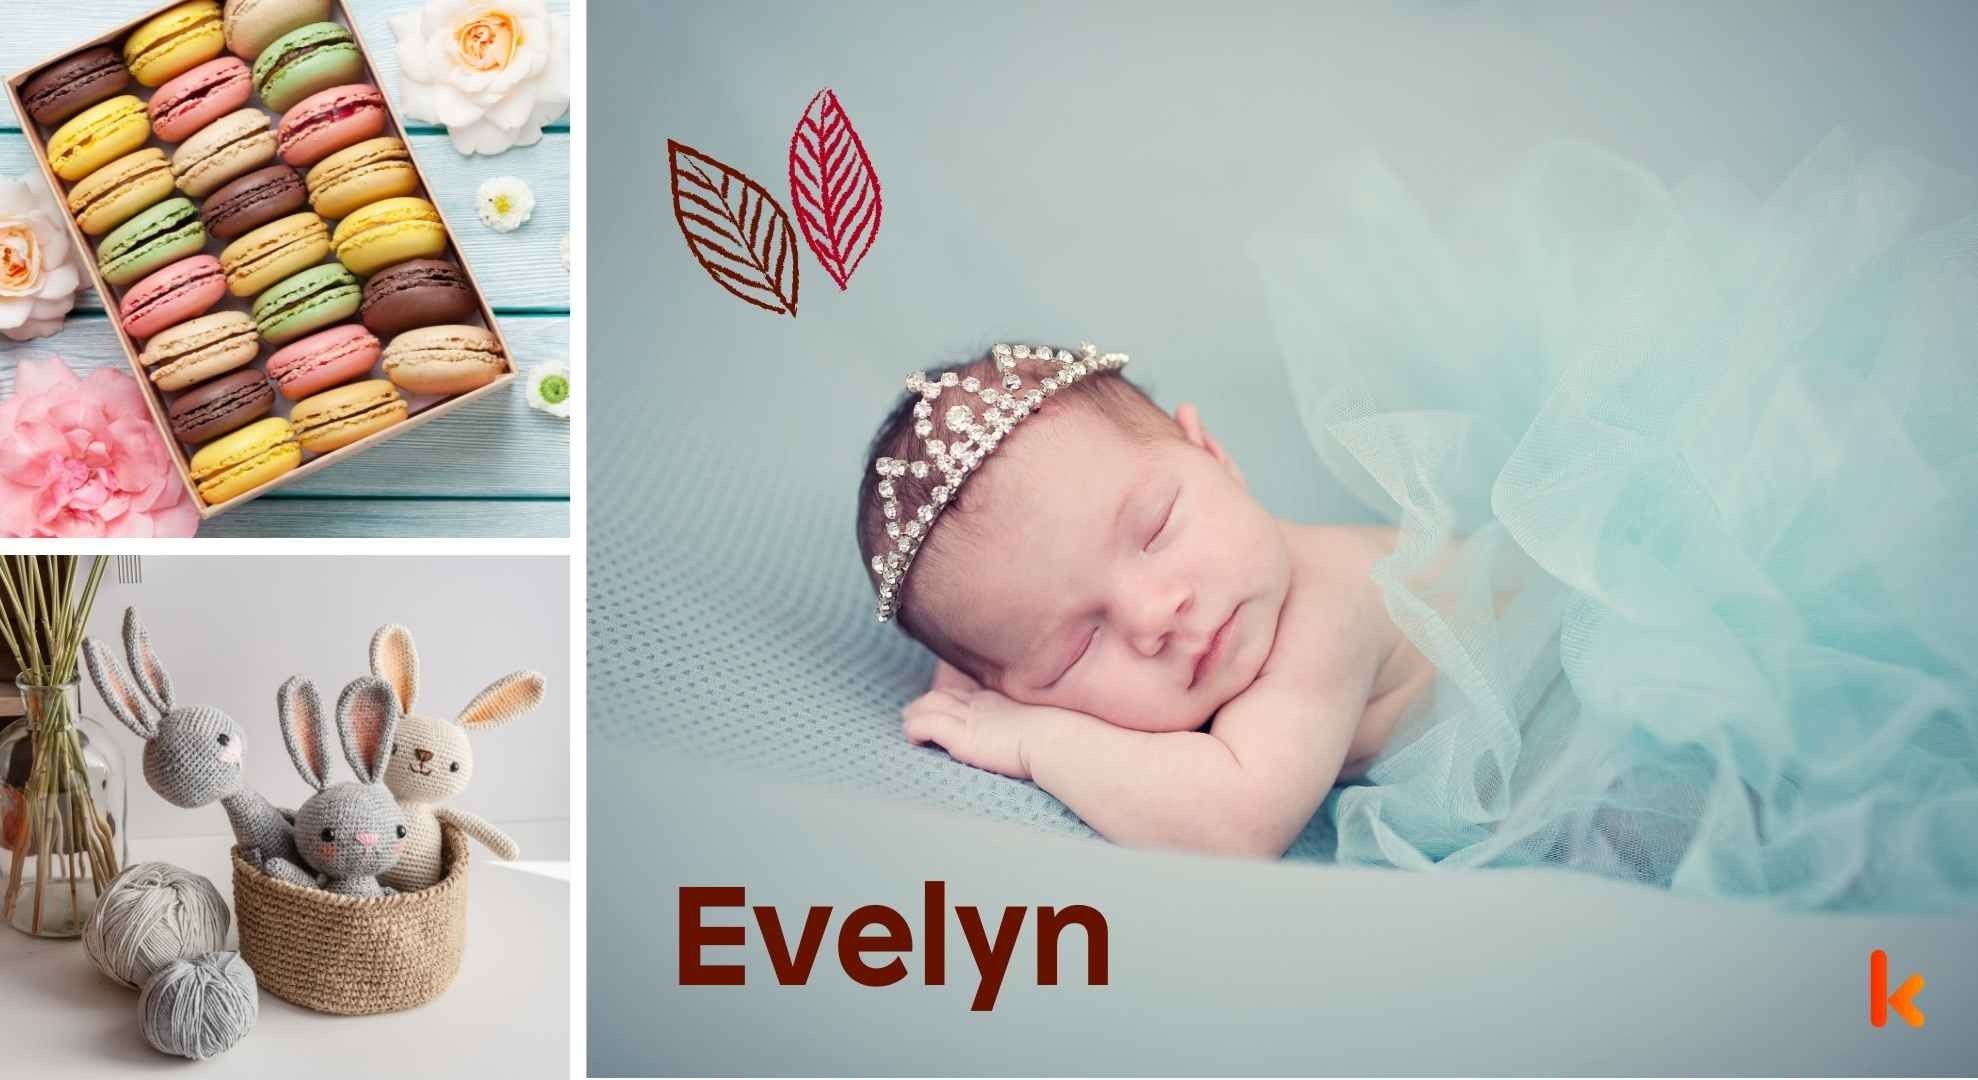 Meaning of the name Evelyn